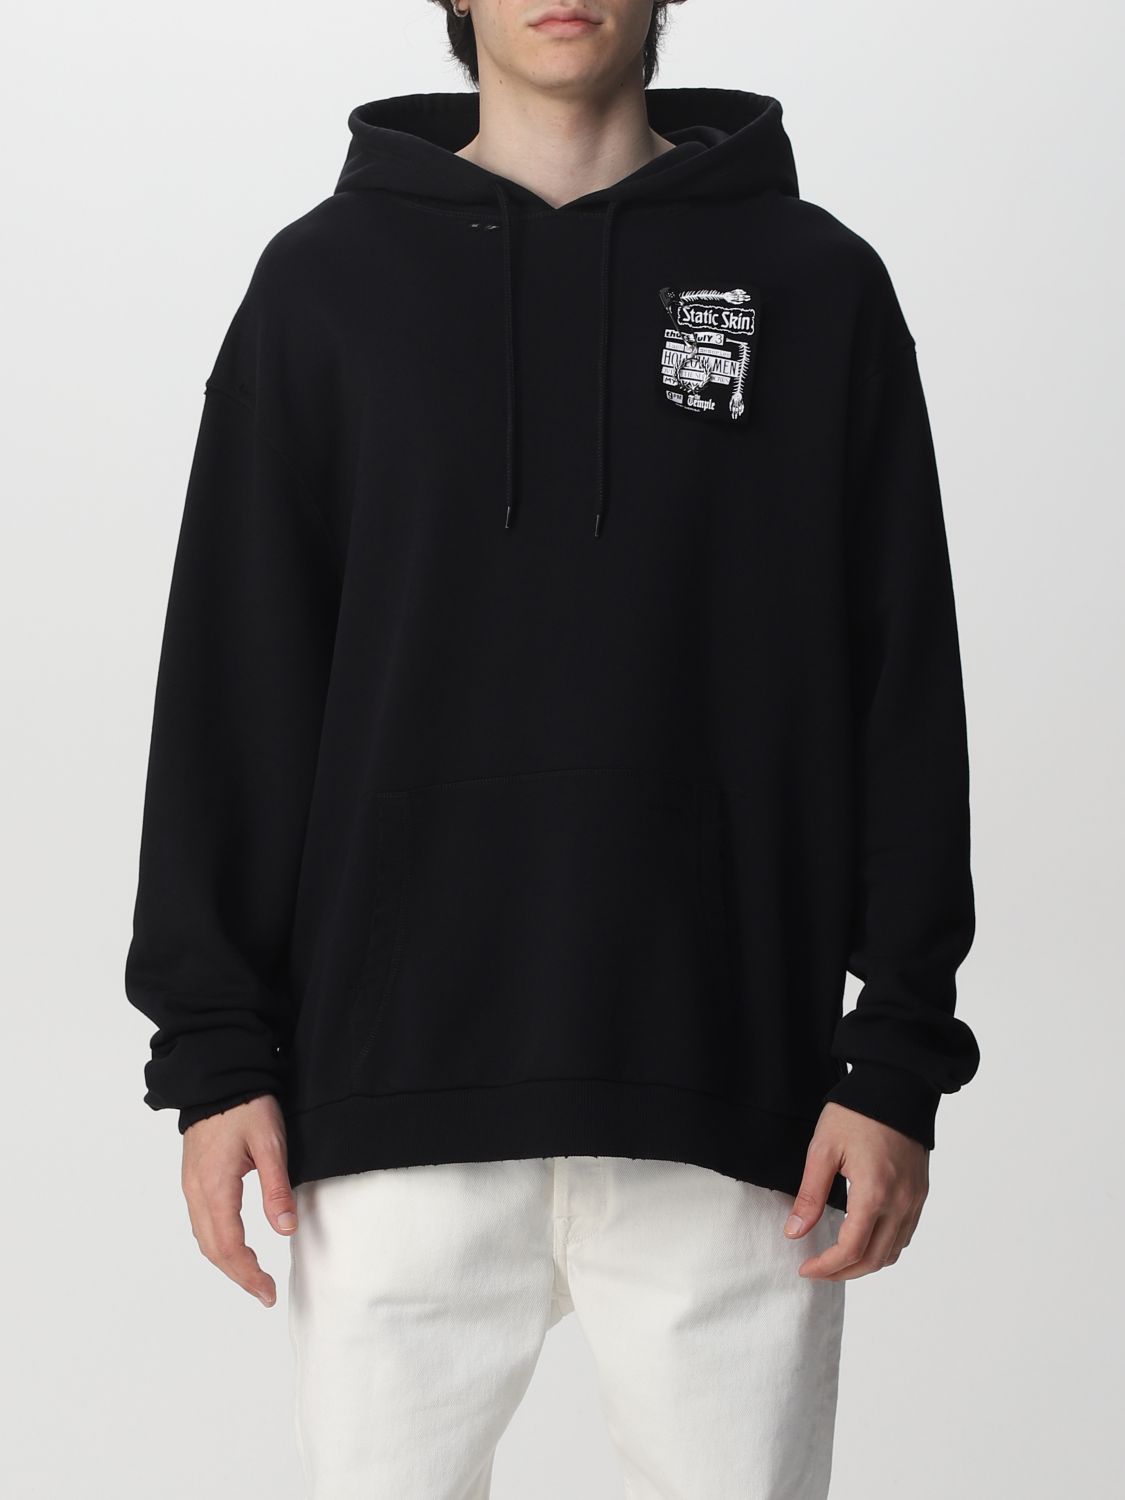 FRED PERRY BY RAF SIMONS: cotton sweatshirt - Black | Fred Perry Raf sweatshirt SM1953 at GIGLIO.COM